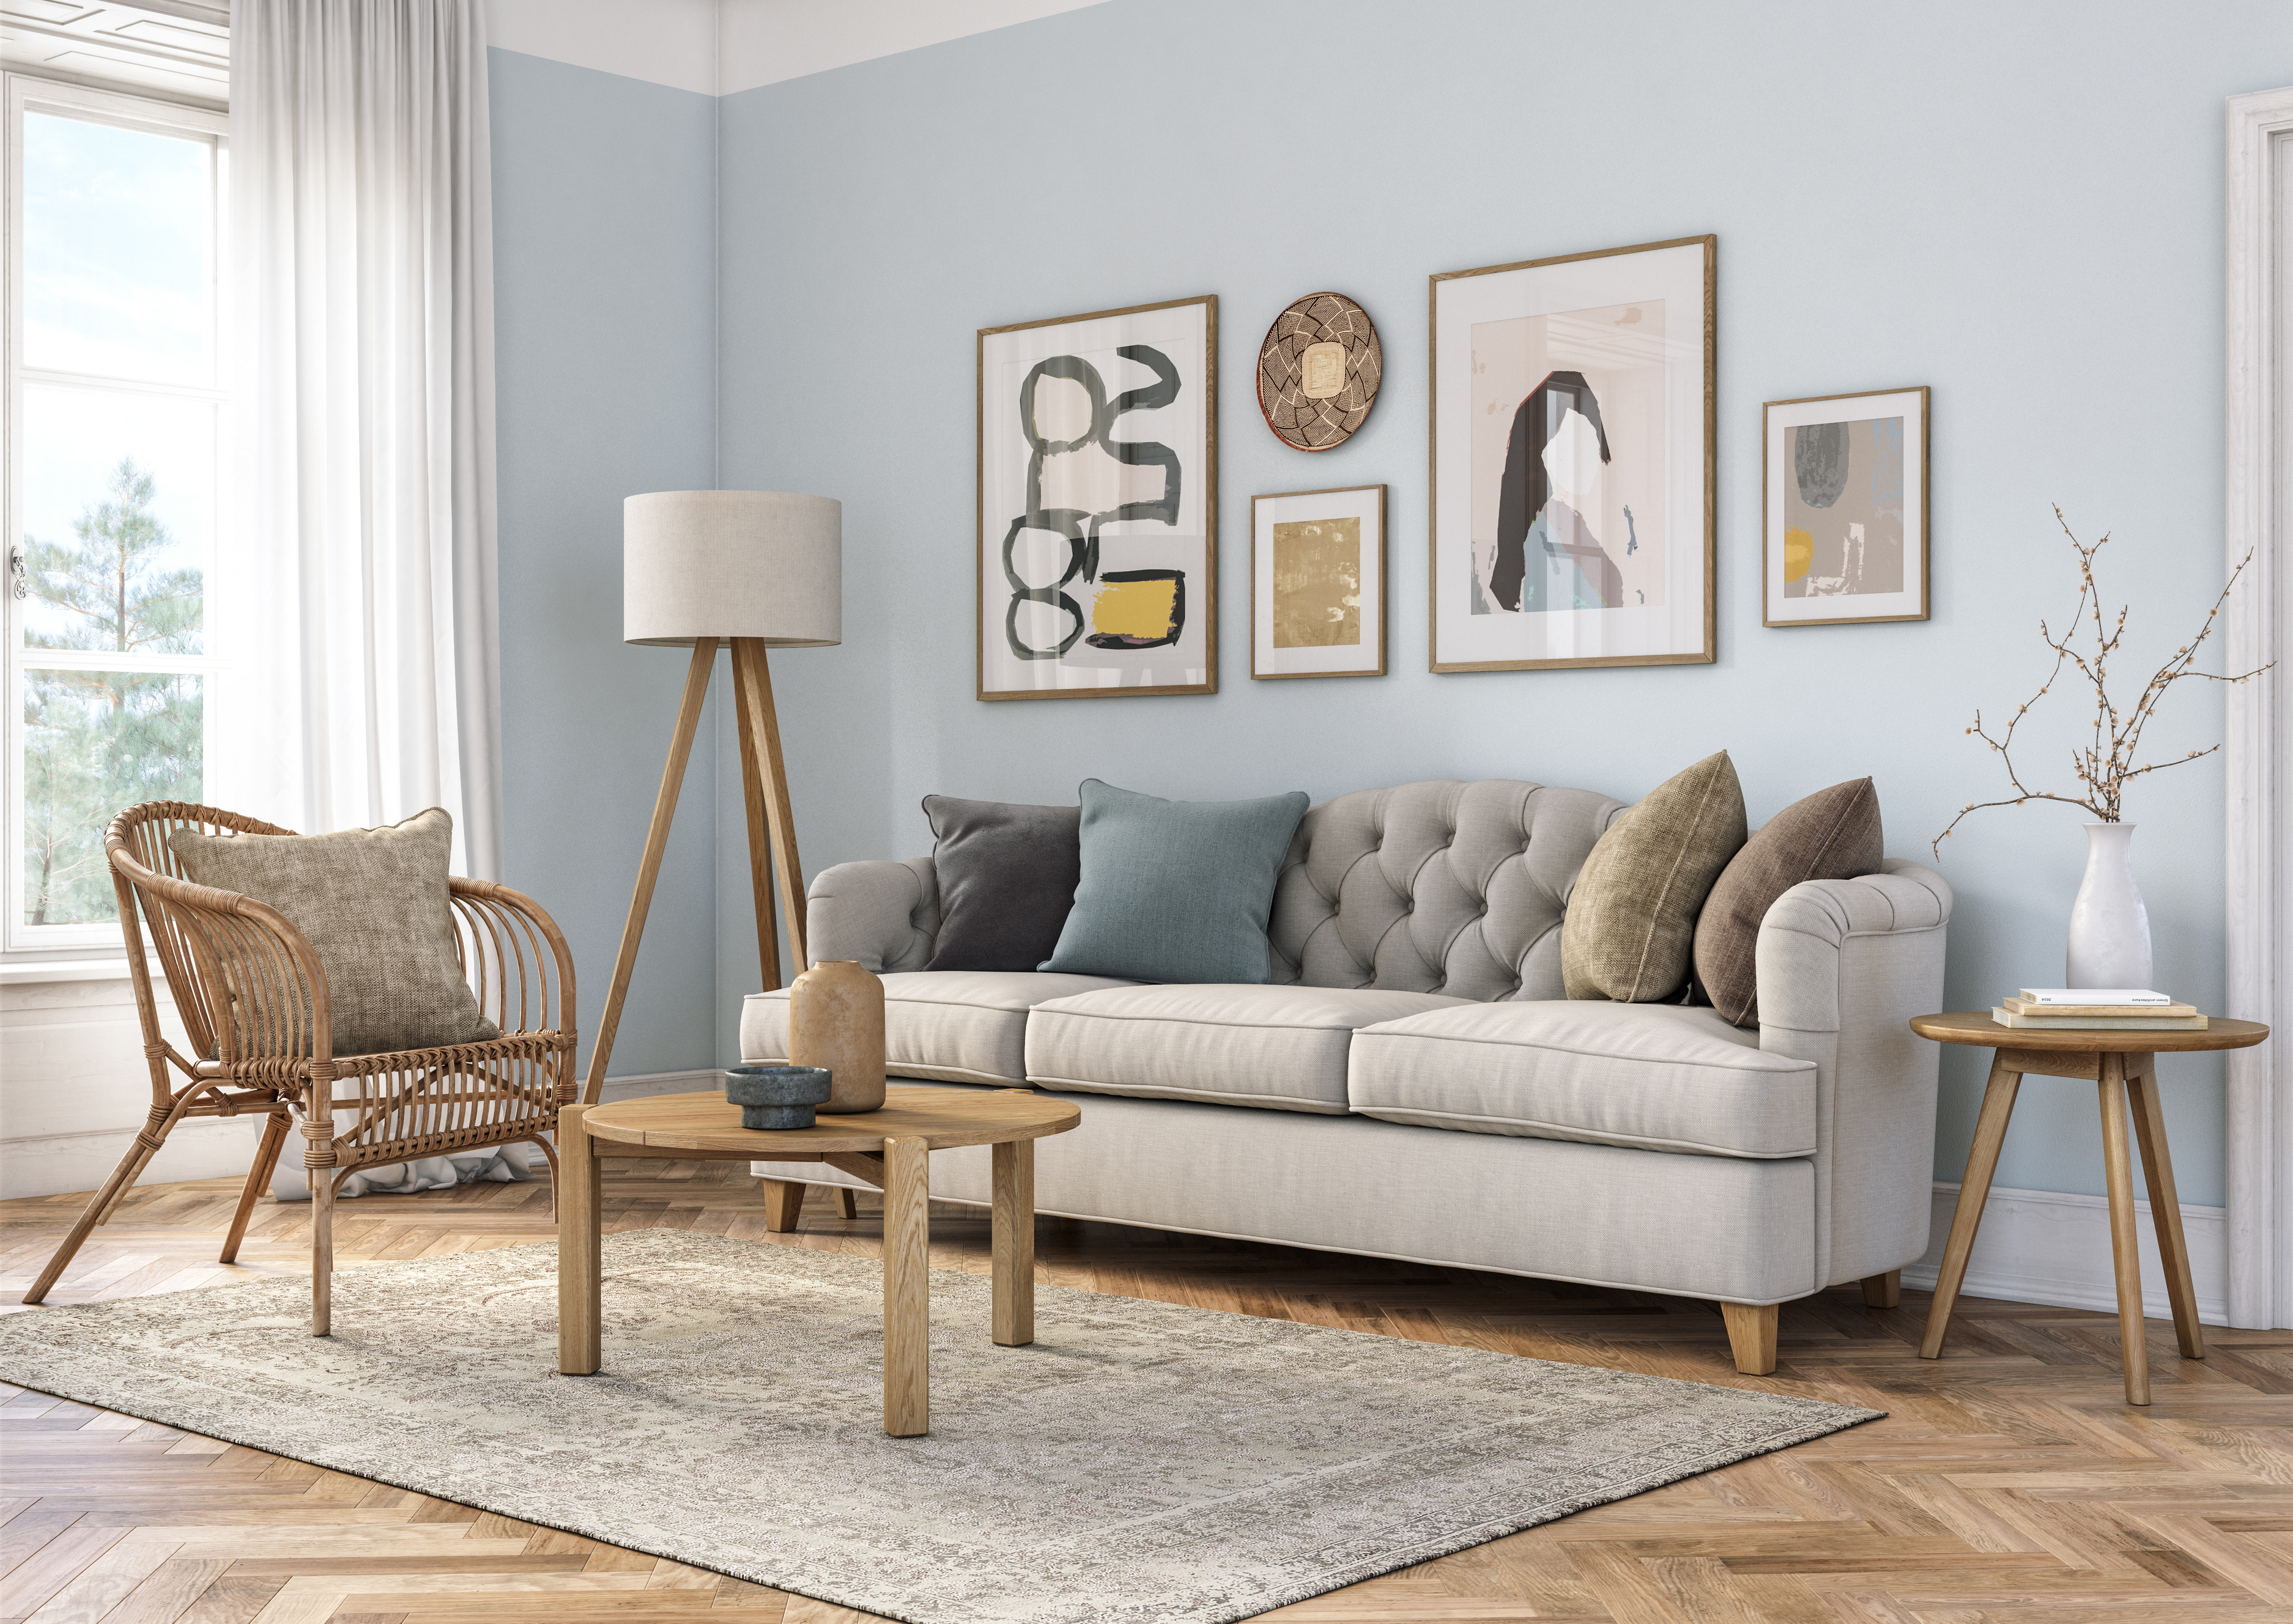 Where to buy affordable and stylish secondhand furniture for NYC apartment